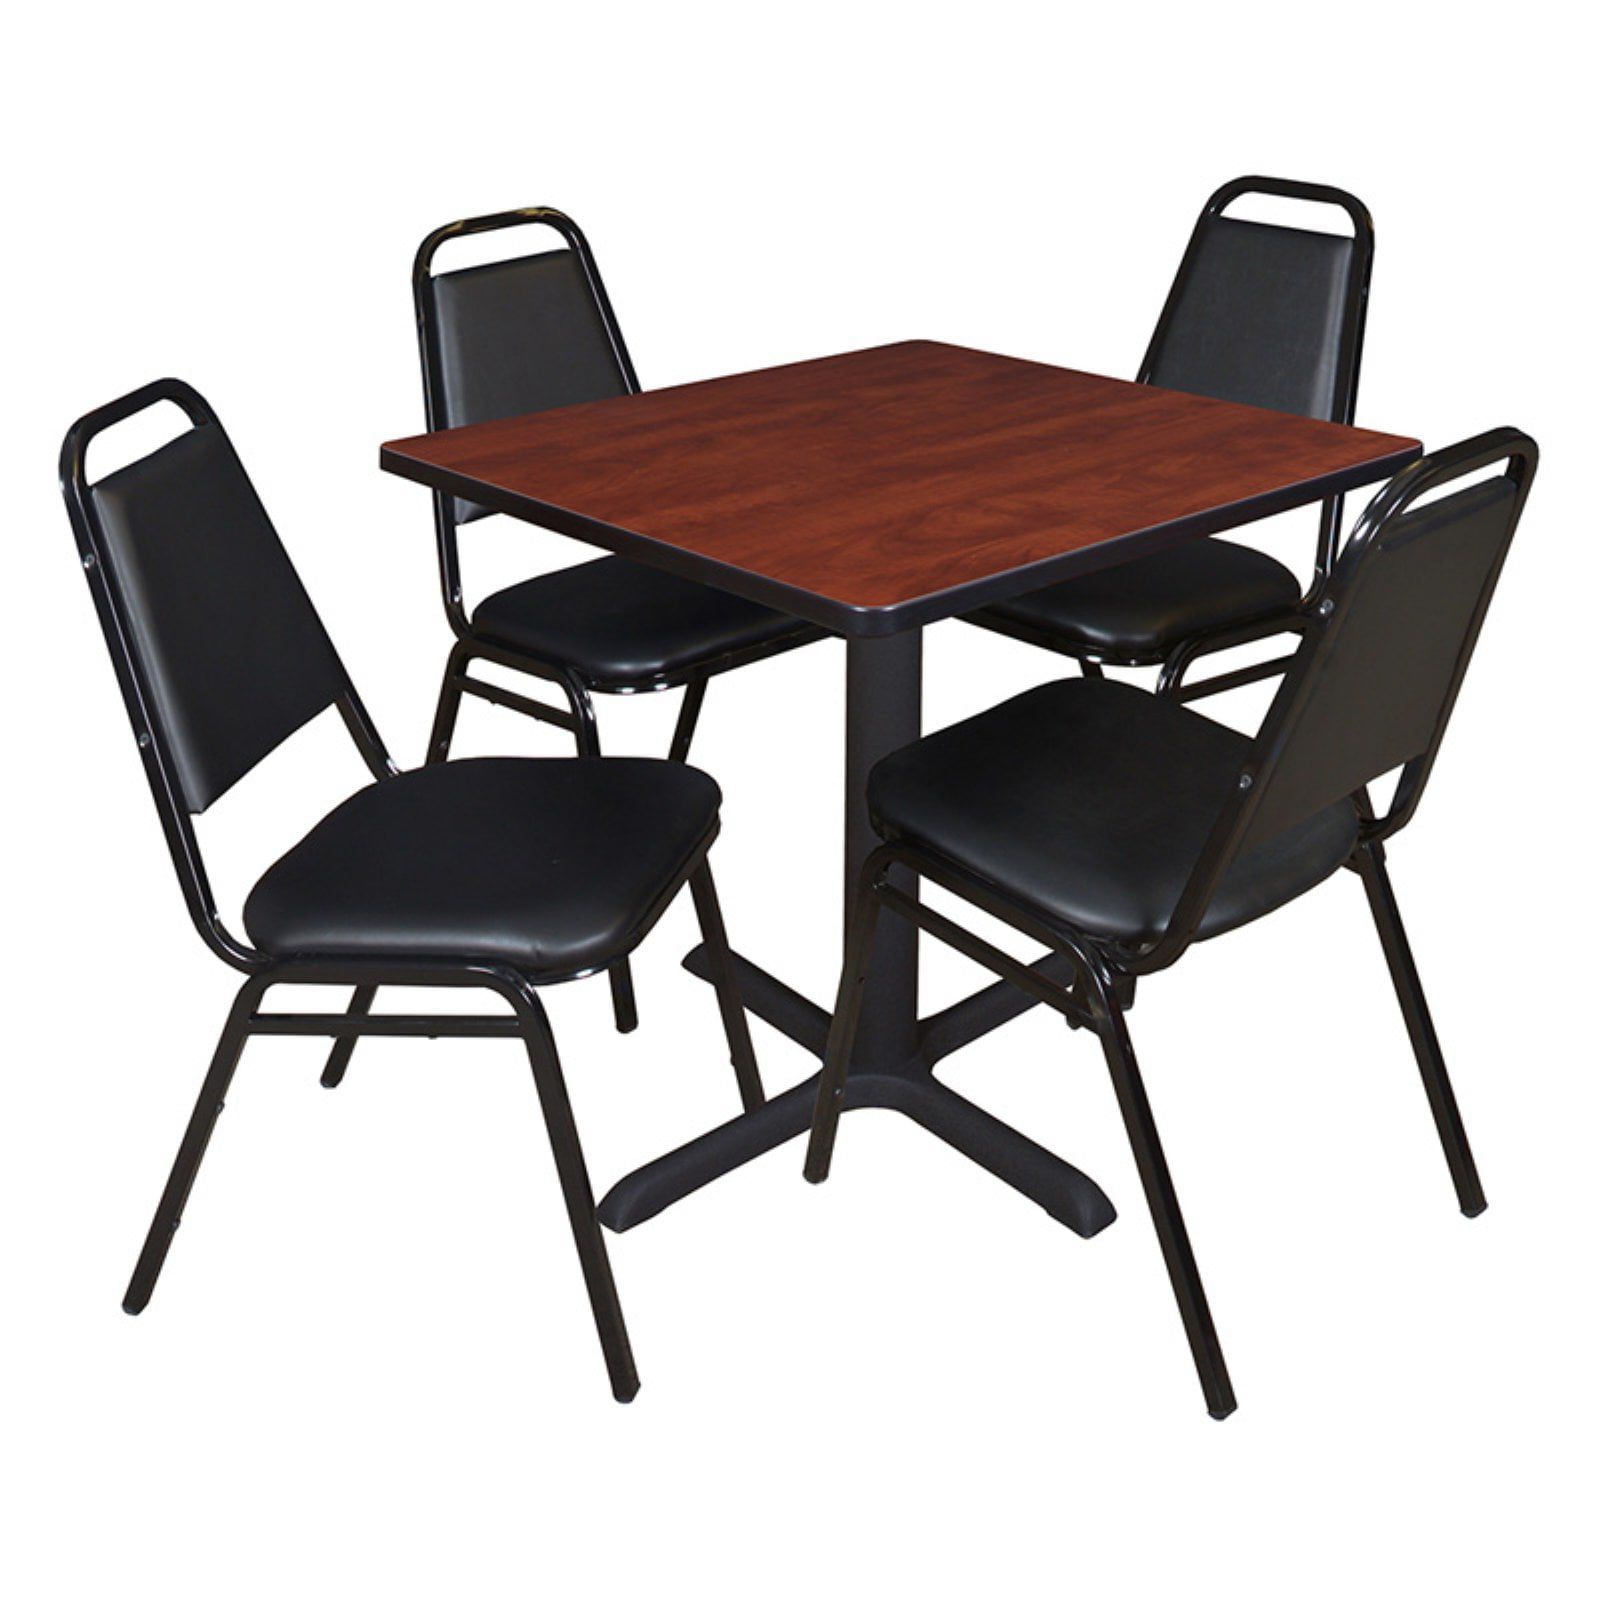 Regency Cain Square Breakroom Table With 4 Stackable Restaurant Chairs For Regency Cain Steel Coffee Tables (Gallery 10 of 20)